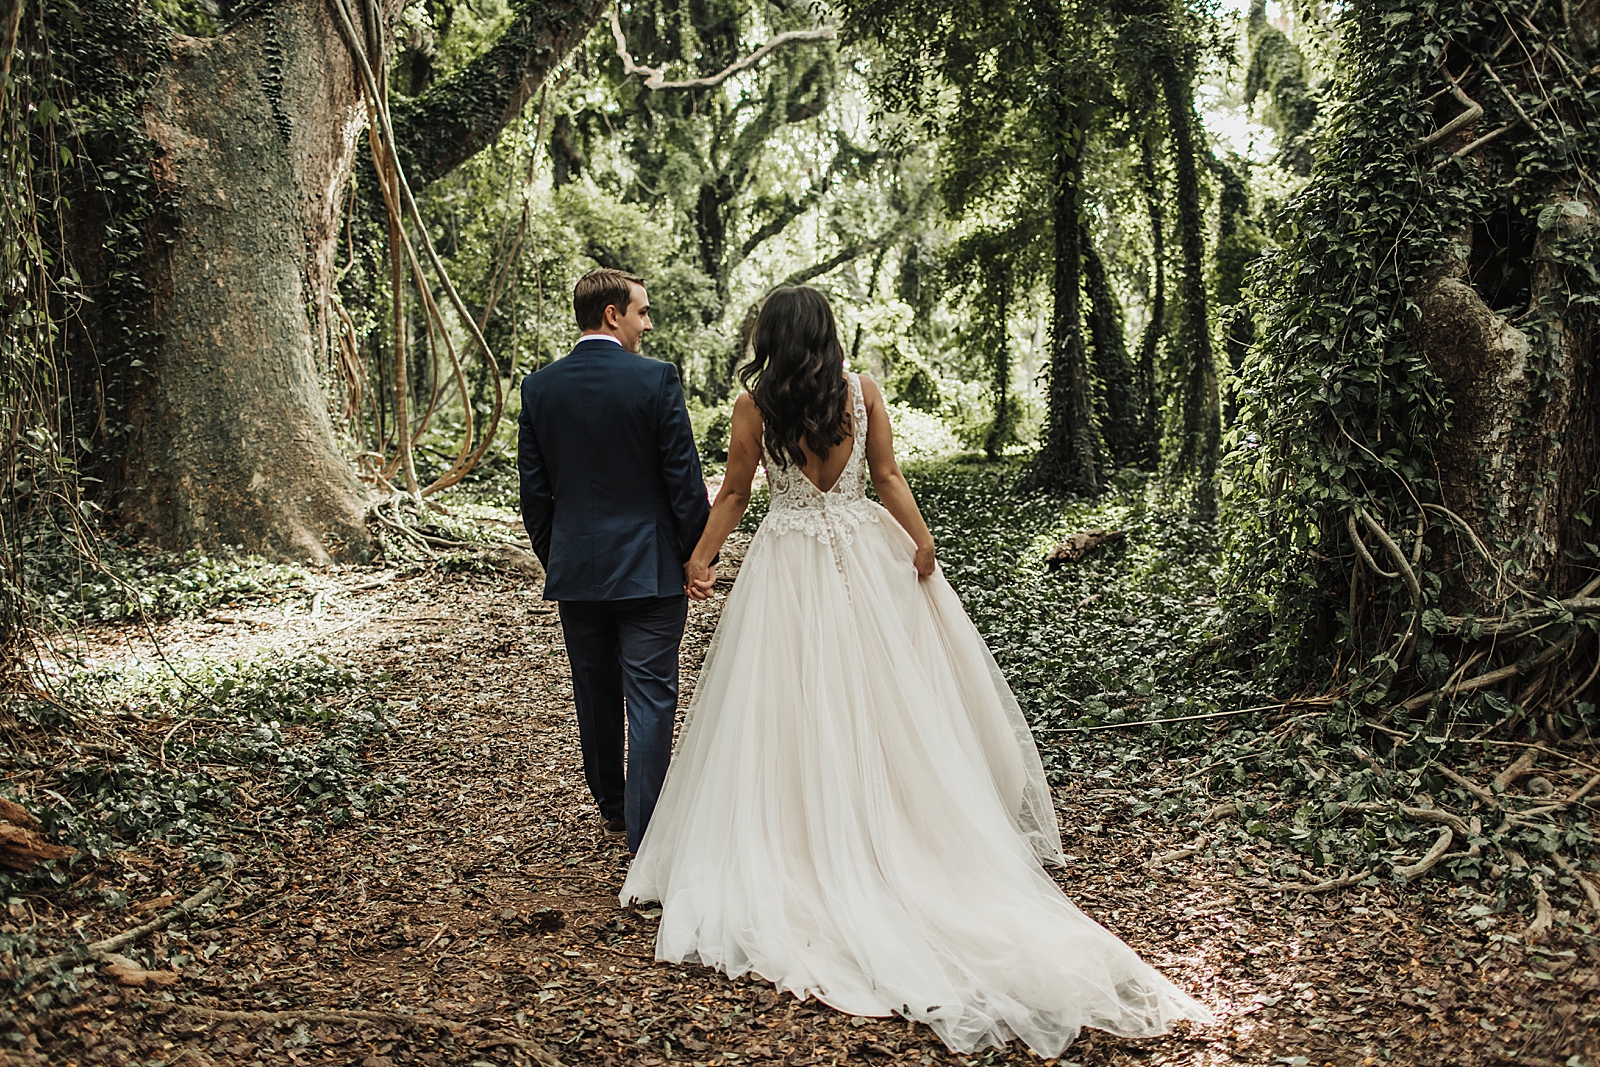 Bride and Groom holding hands and walking in forest together